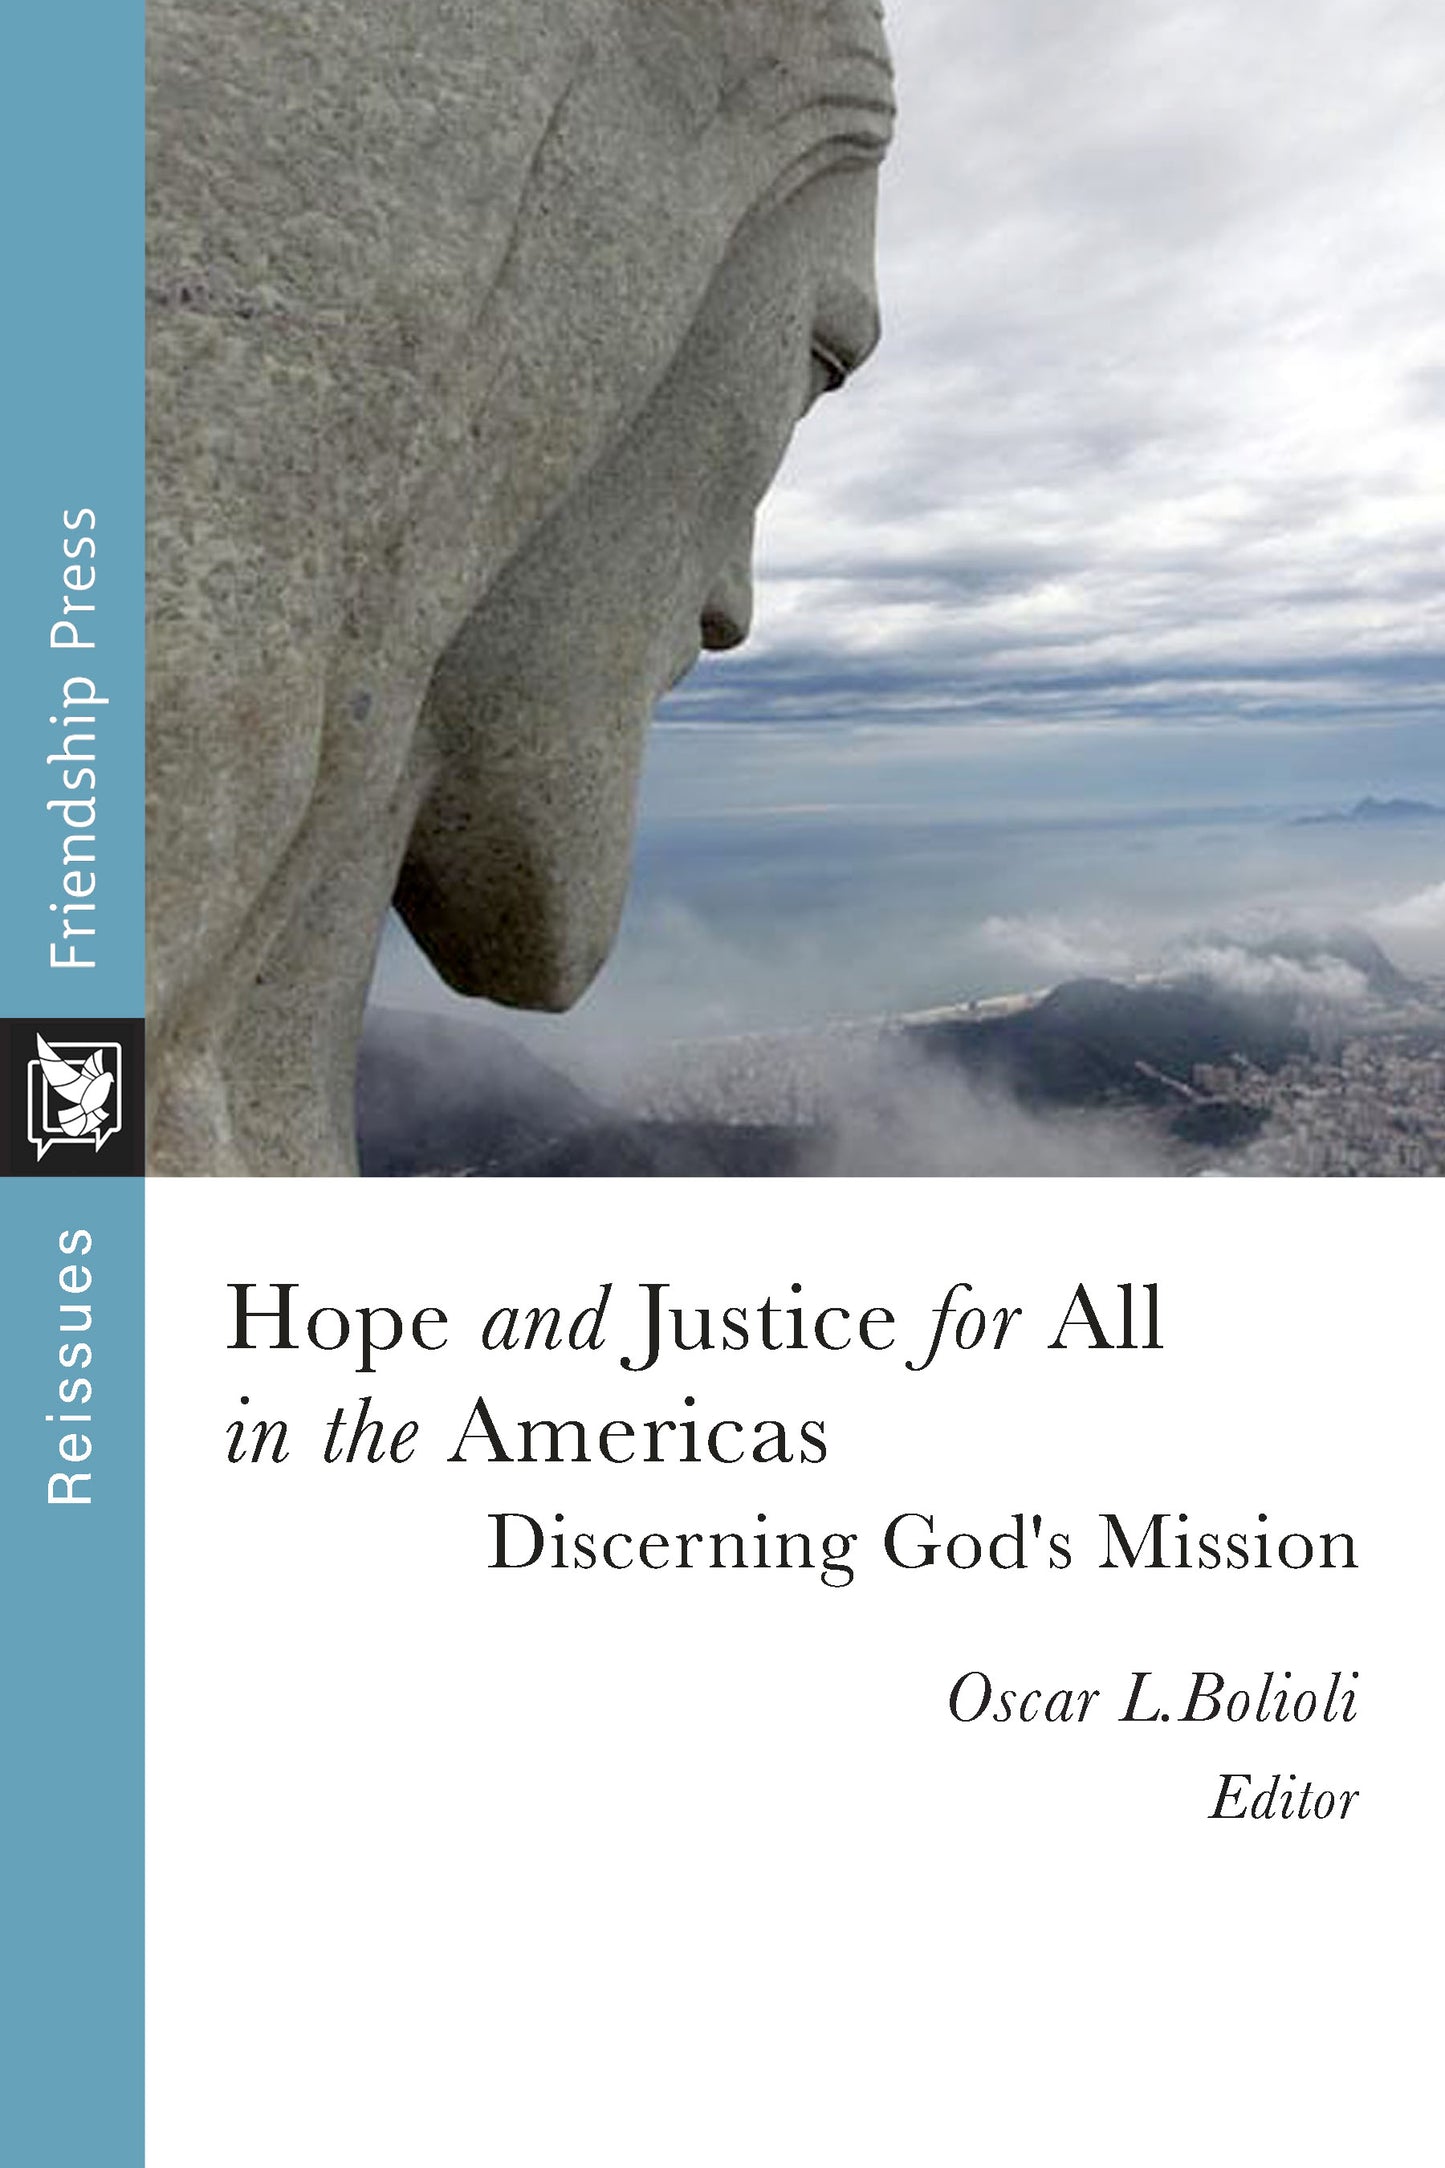 Hope and Justice for All in the Americas